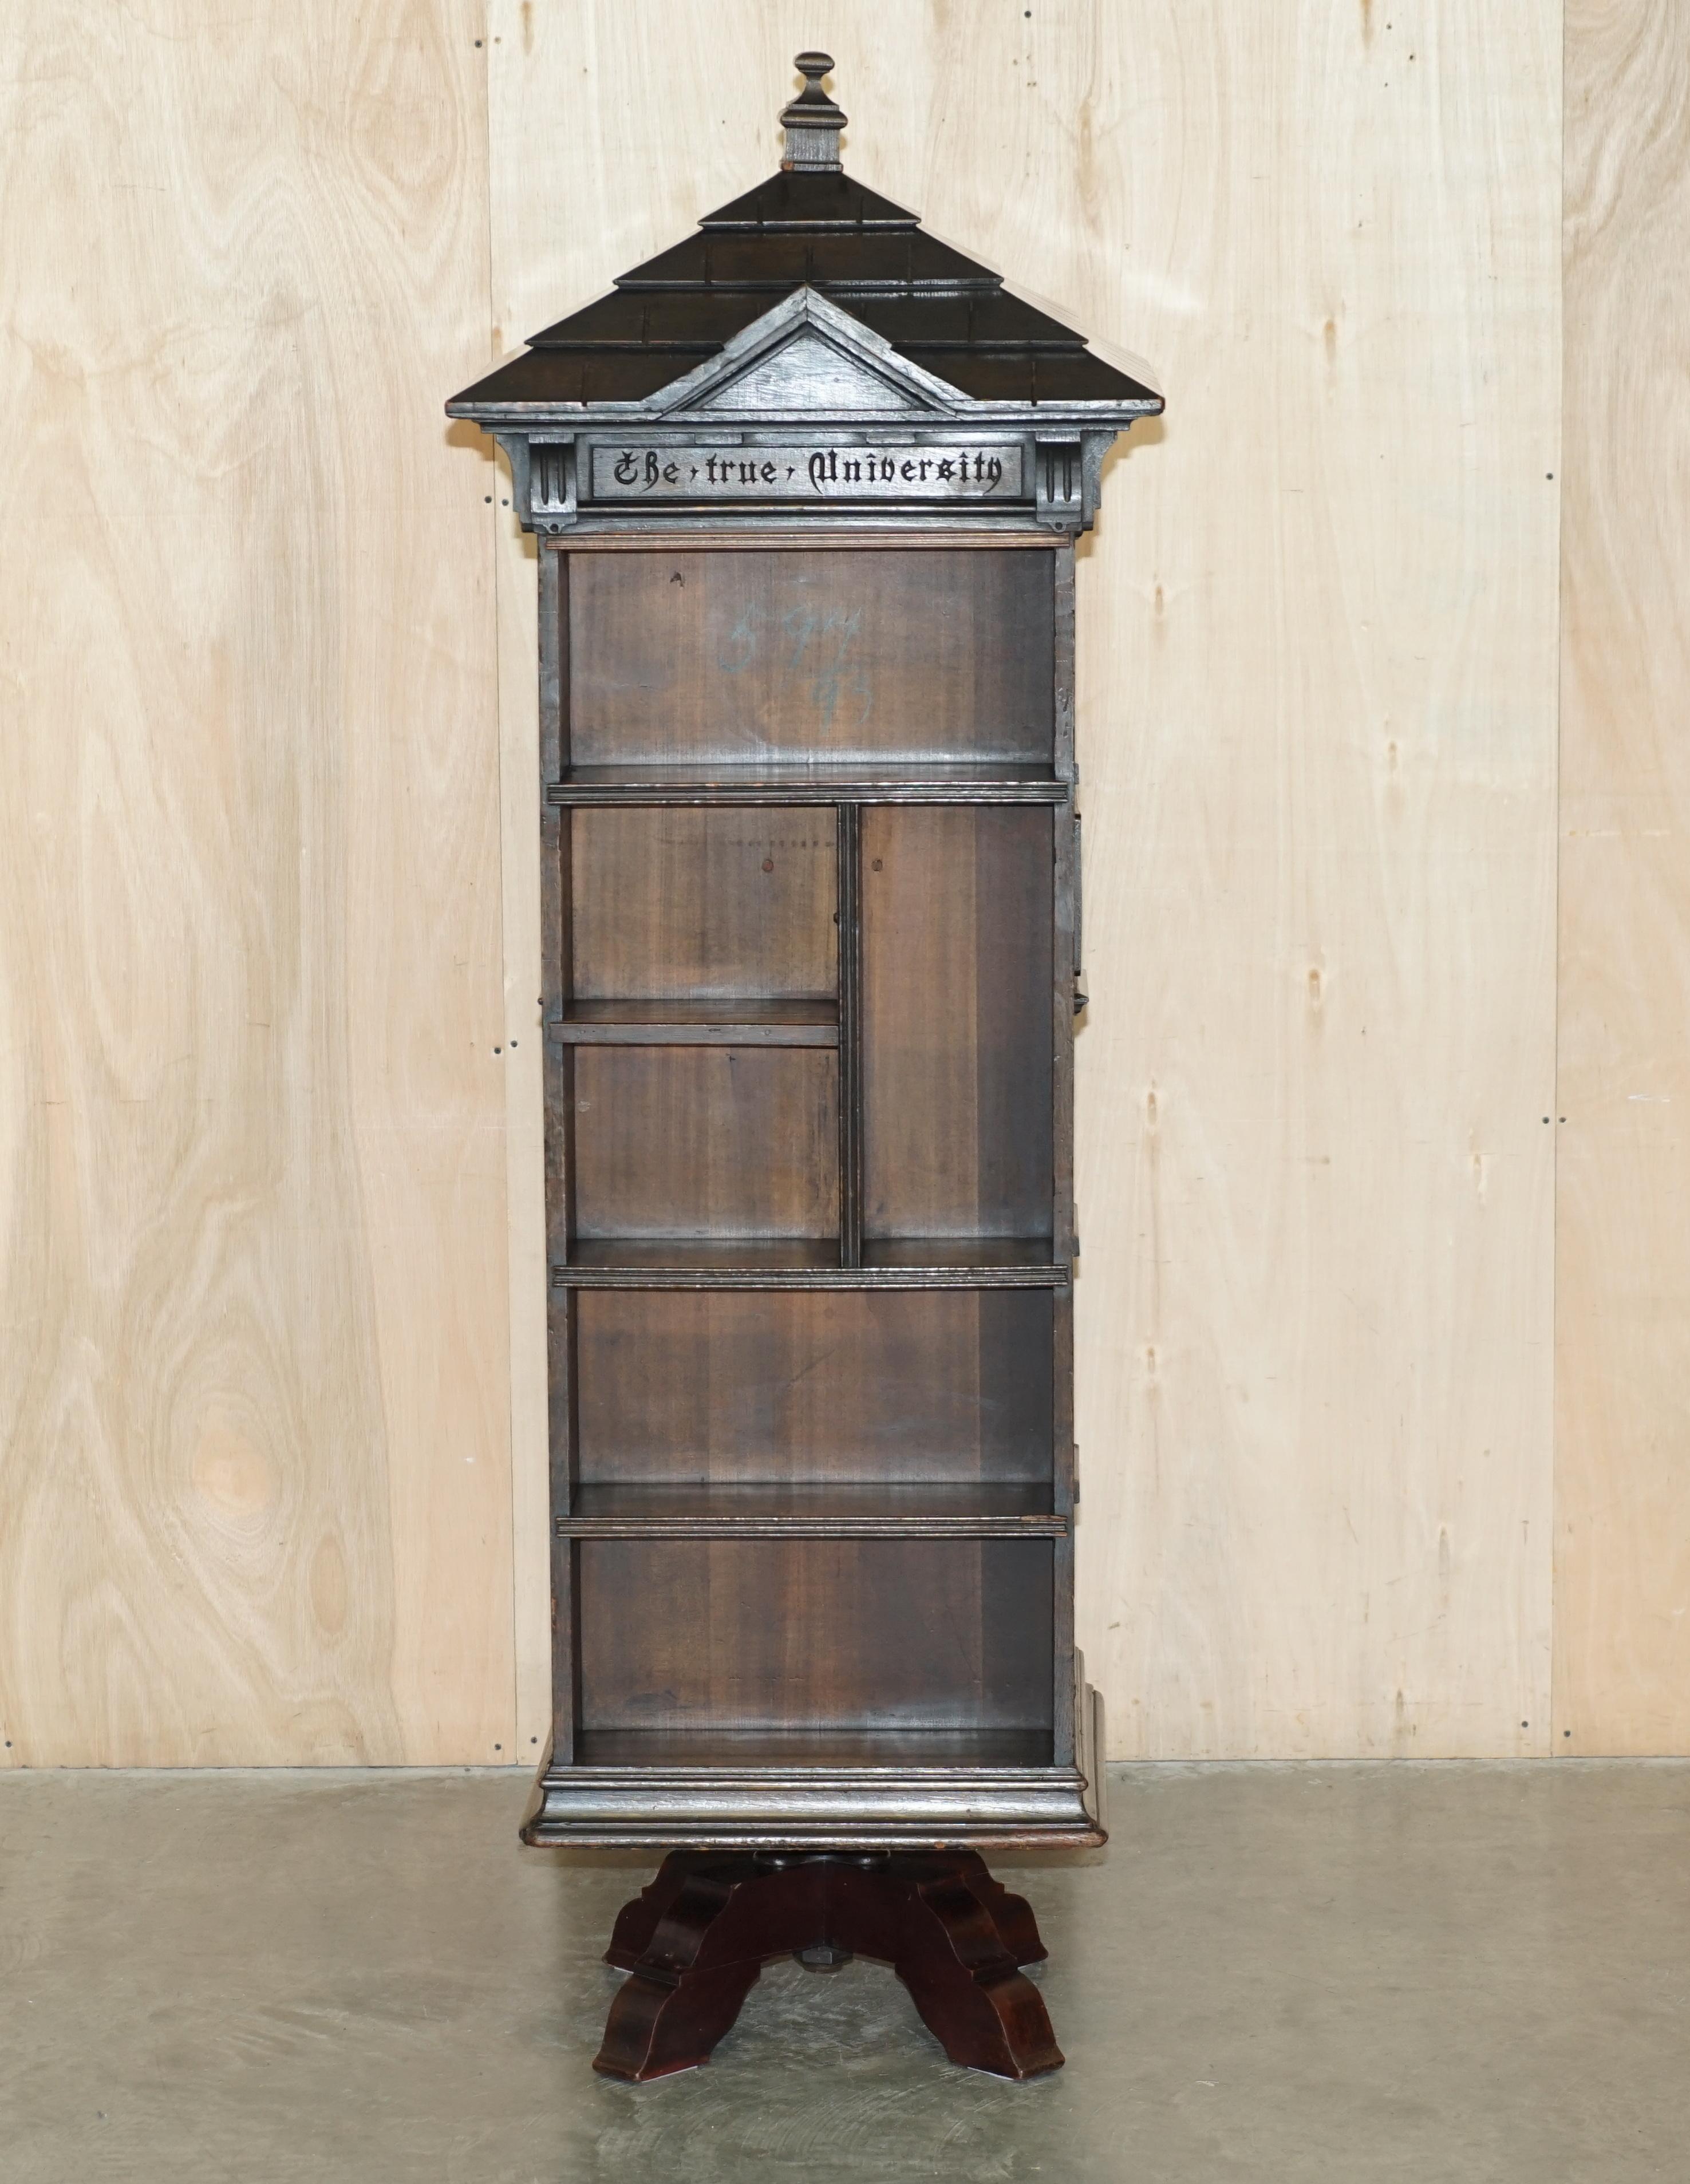 Royal House Antiques

Royal House Antiques is delighted to offer for sale this super rare, highly collectable, Antique Victorian, Seymour Easton 1859-1916 Tabard Inn Revolving bookcase stand 

Please note the delivery fee listed is just a guide, it